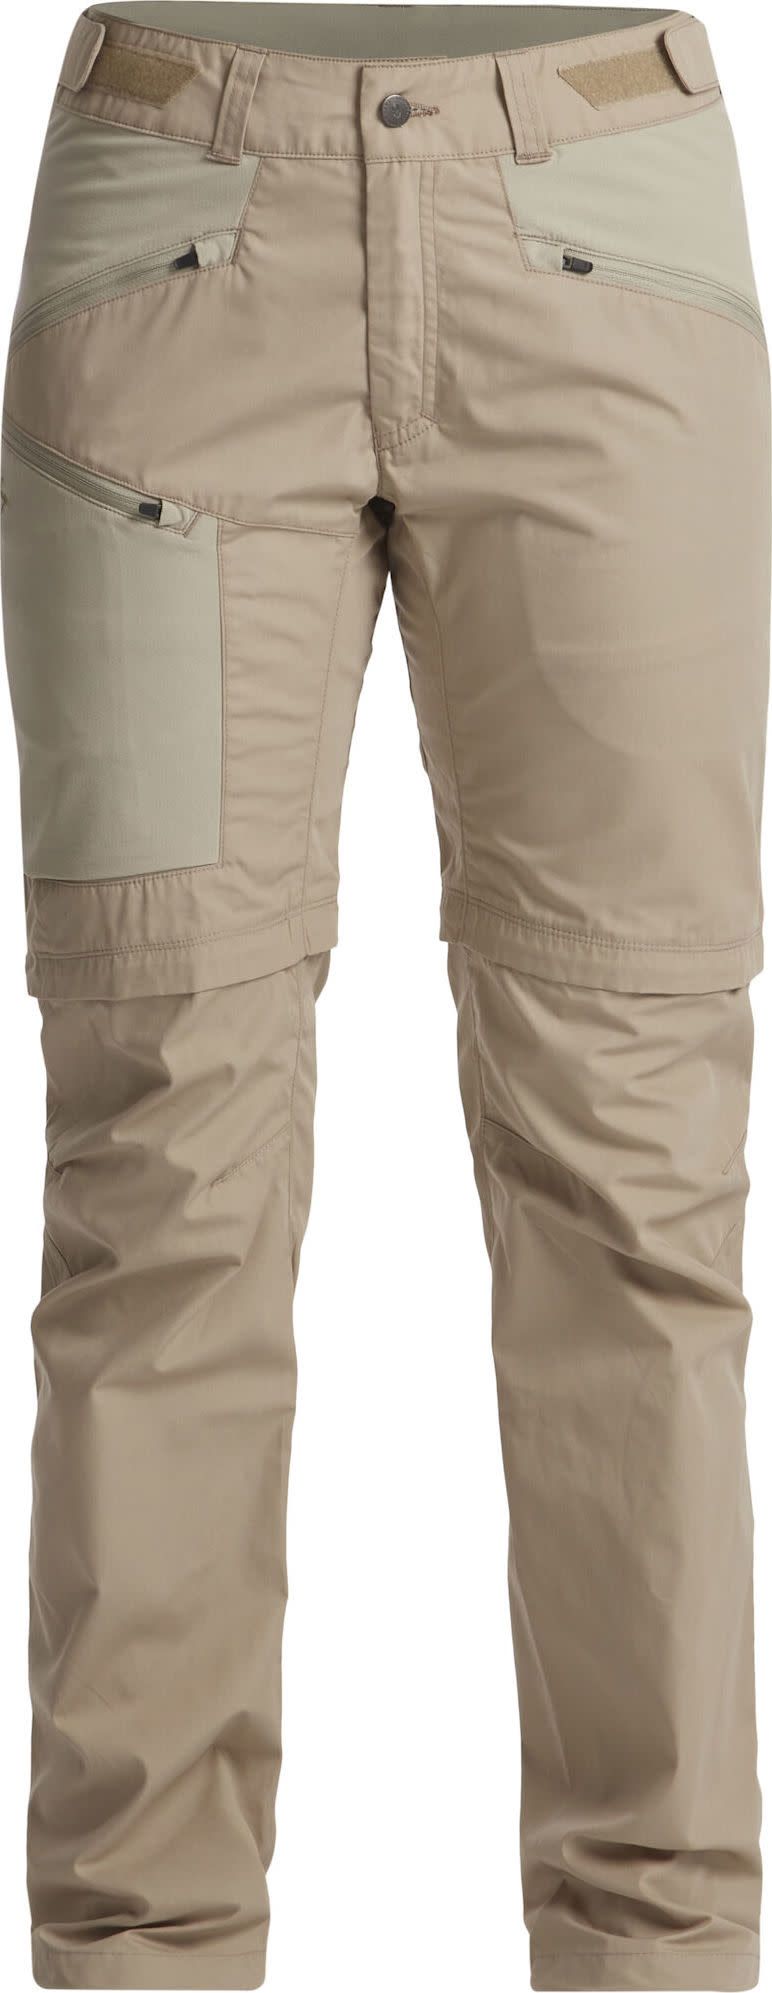 Men's Tived Zip-Off Pant  Sand